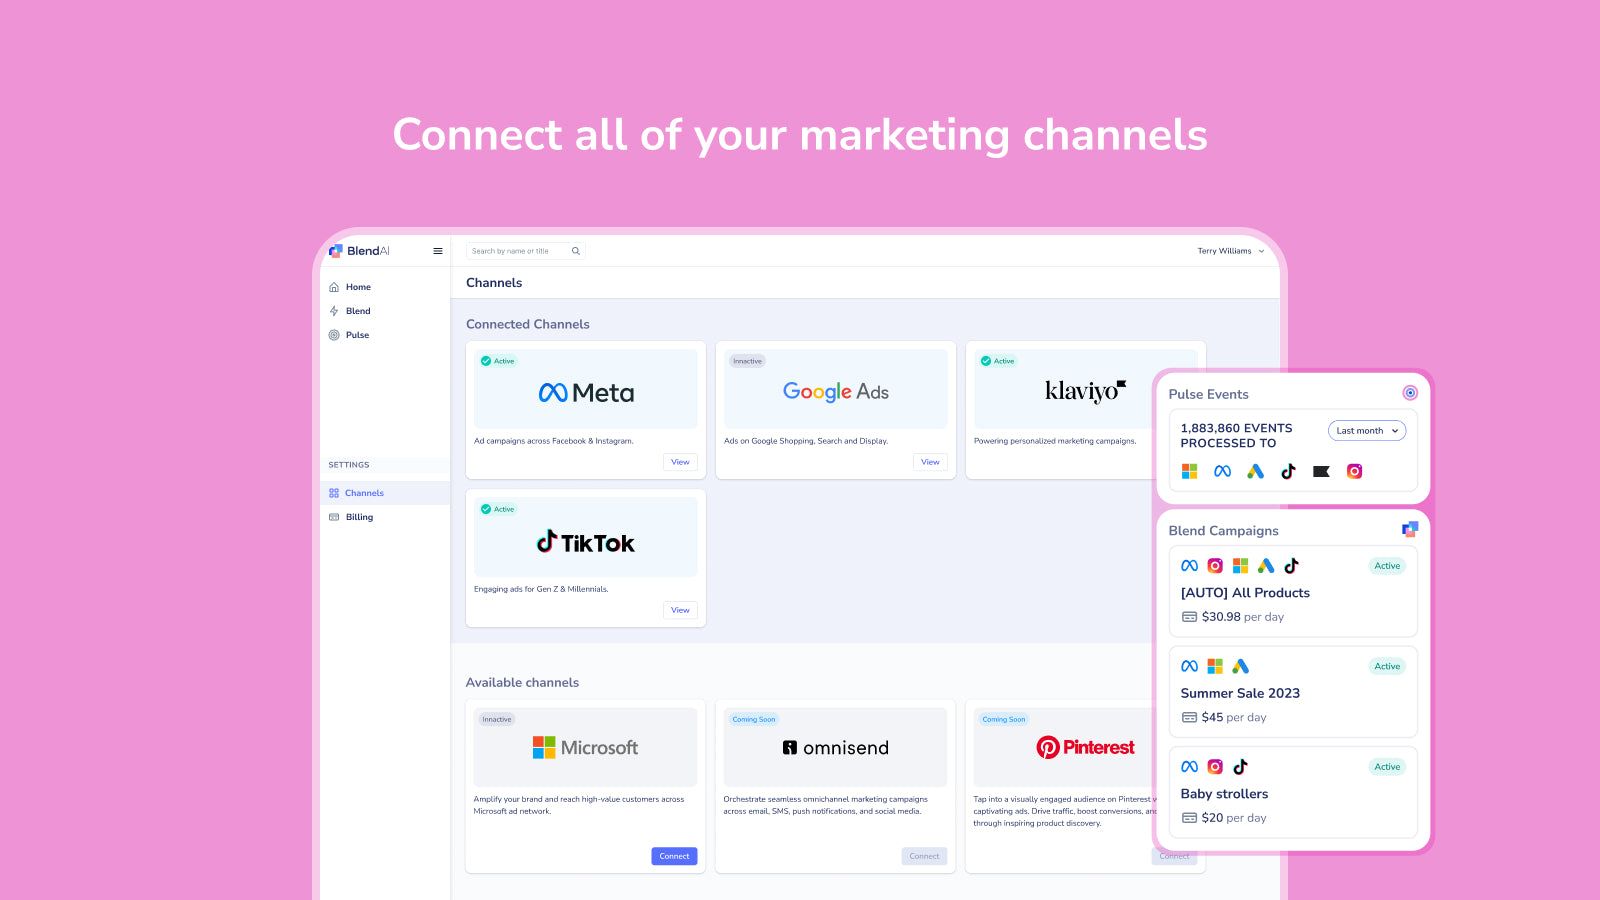 Connect to all of your marketing channels